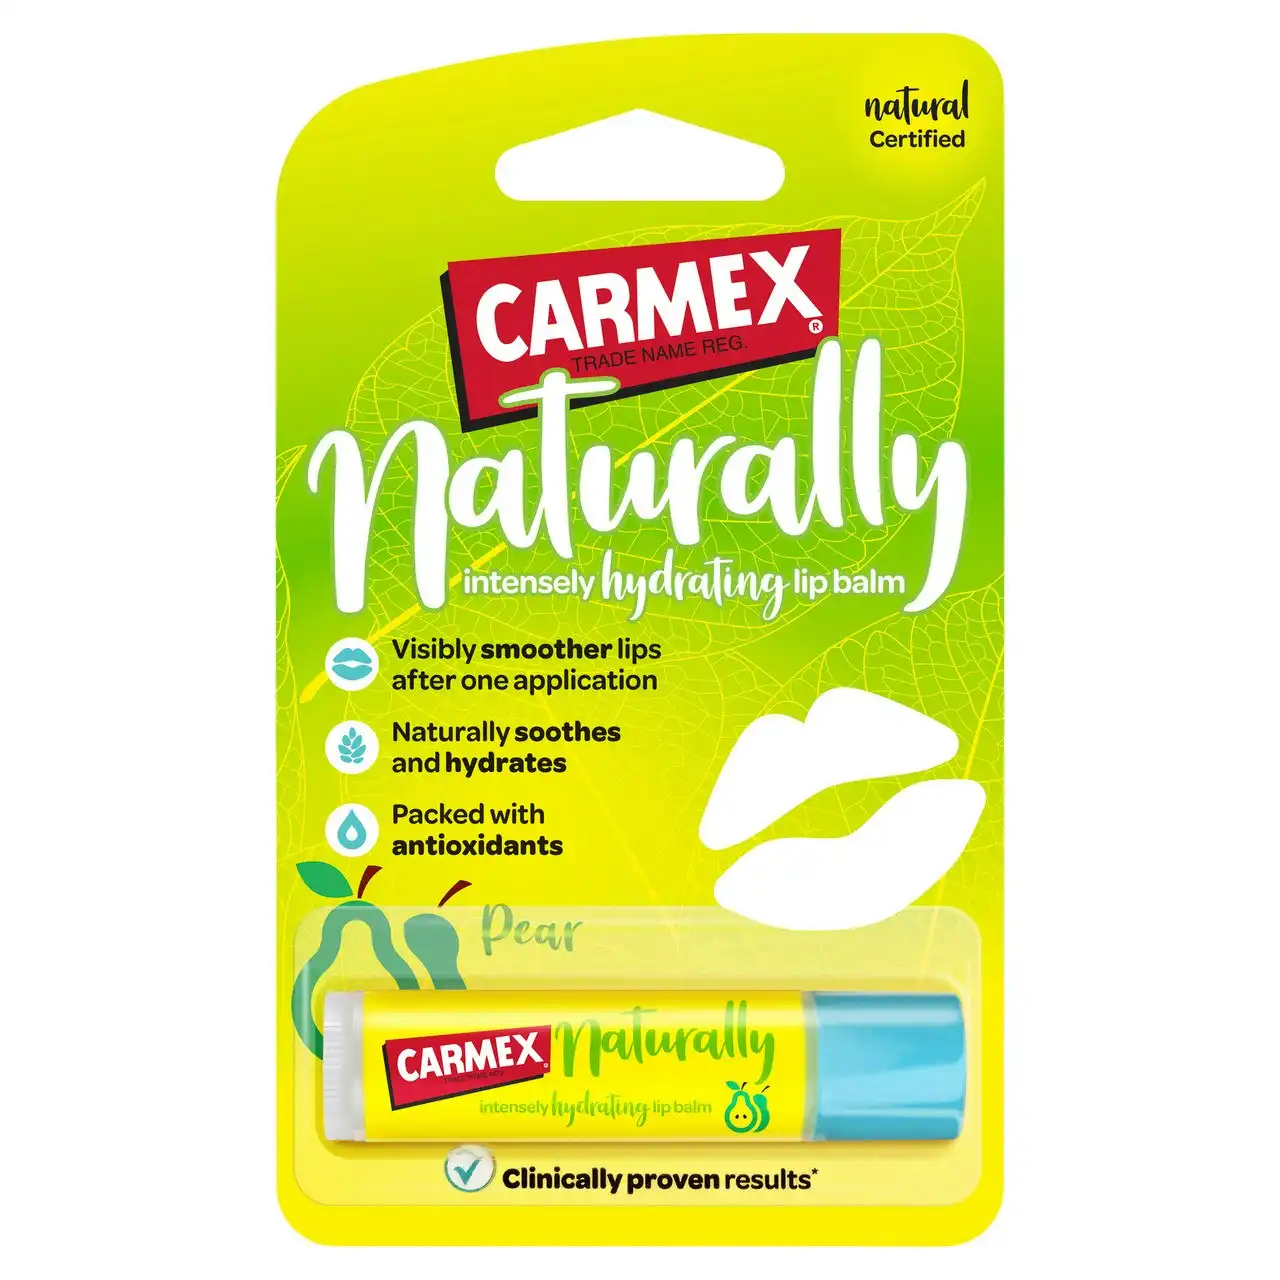 Carmex 'NATURALLY' PEAR intensely hydrating lip balm